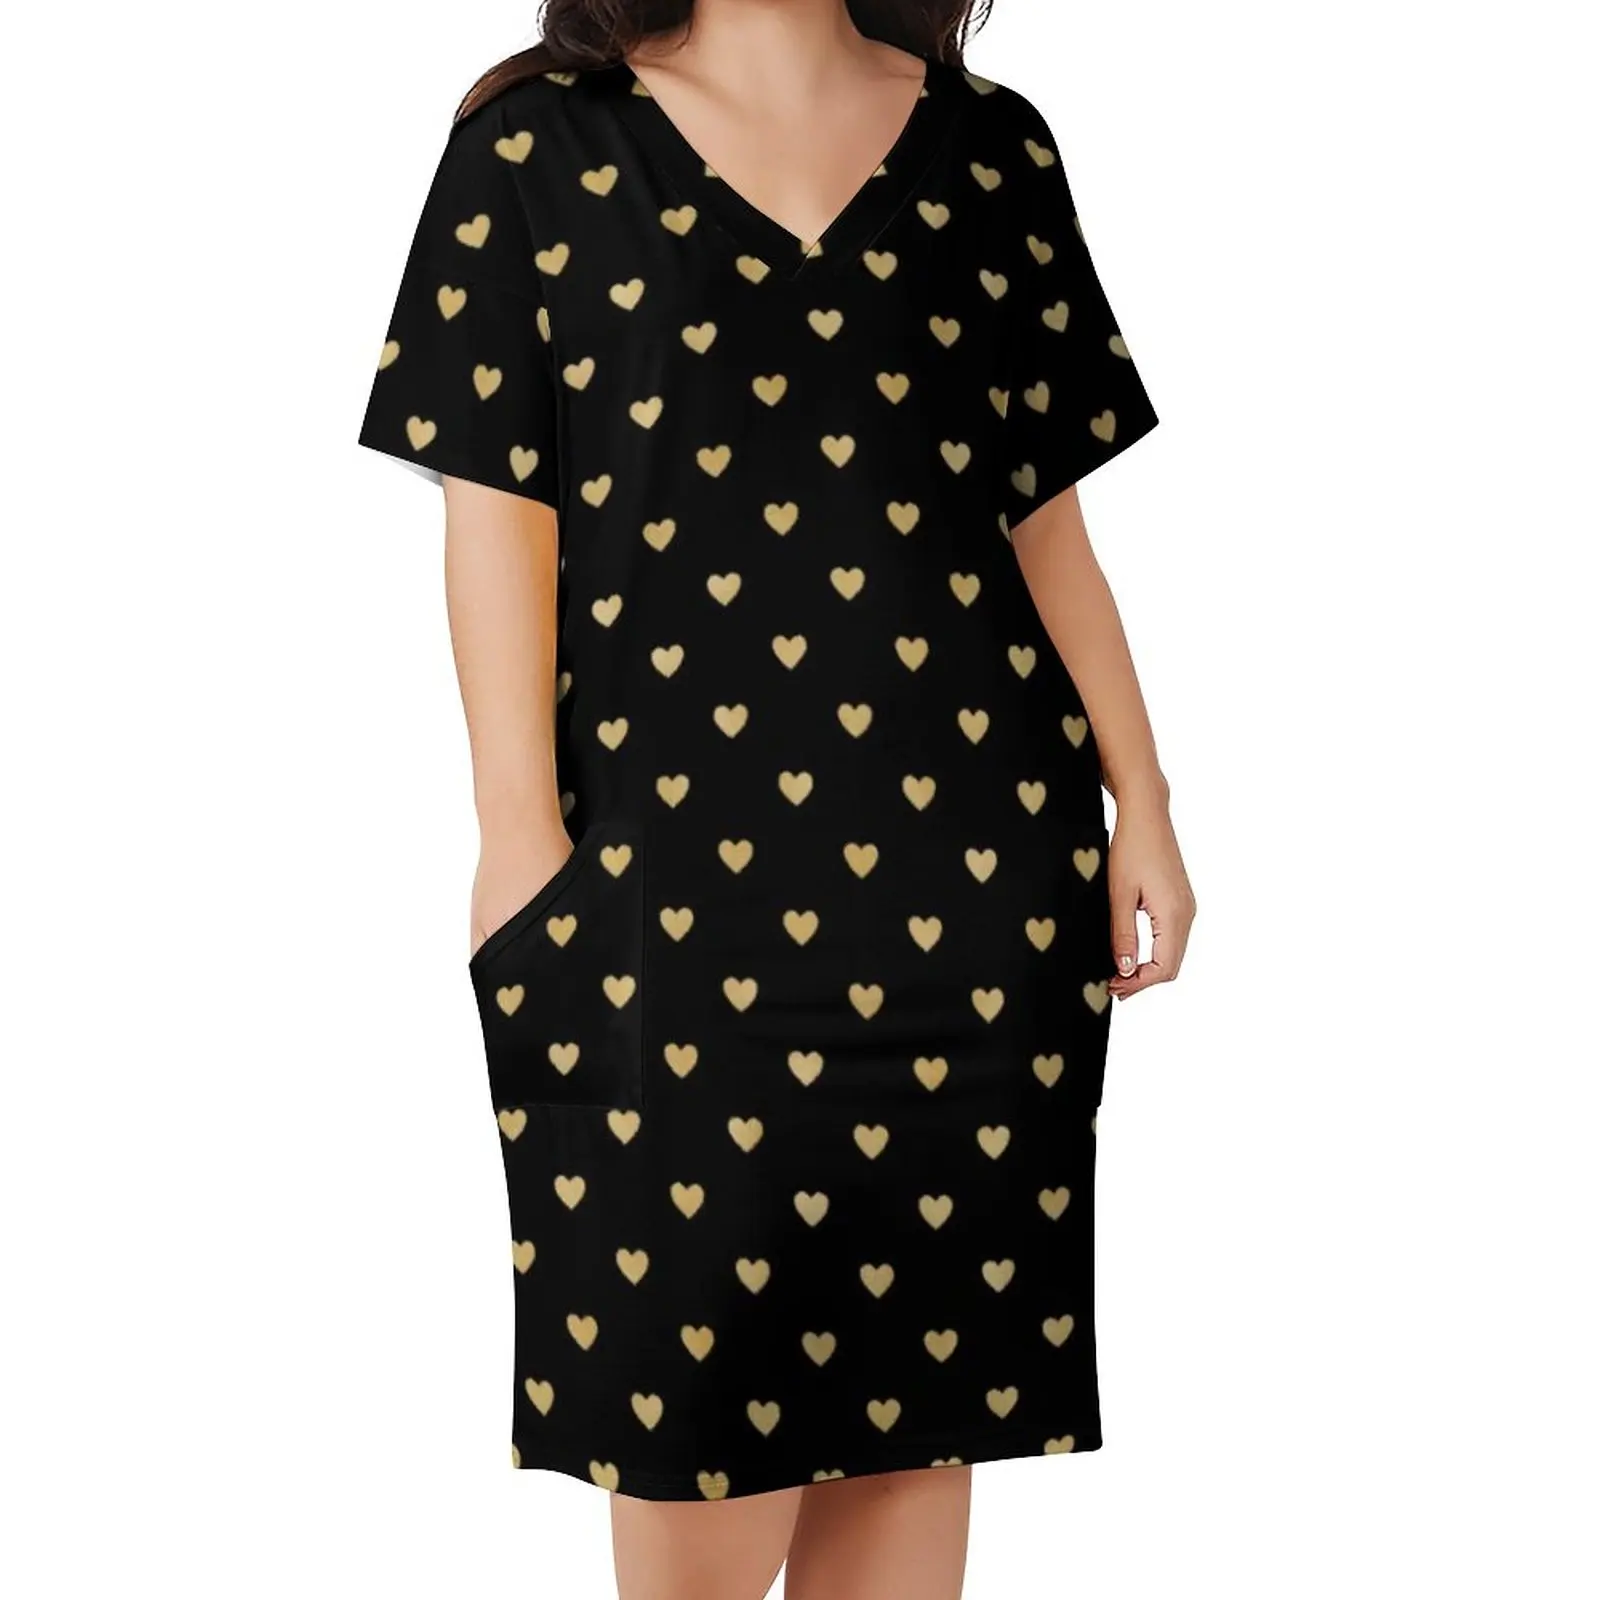 Heart Print Casual Dress Spring Scattered Gold Hearts Modern Dresses Female V Neck Pattern Street Style Dress Plus Size 4XL 5XL